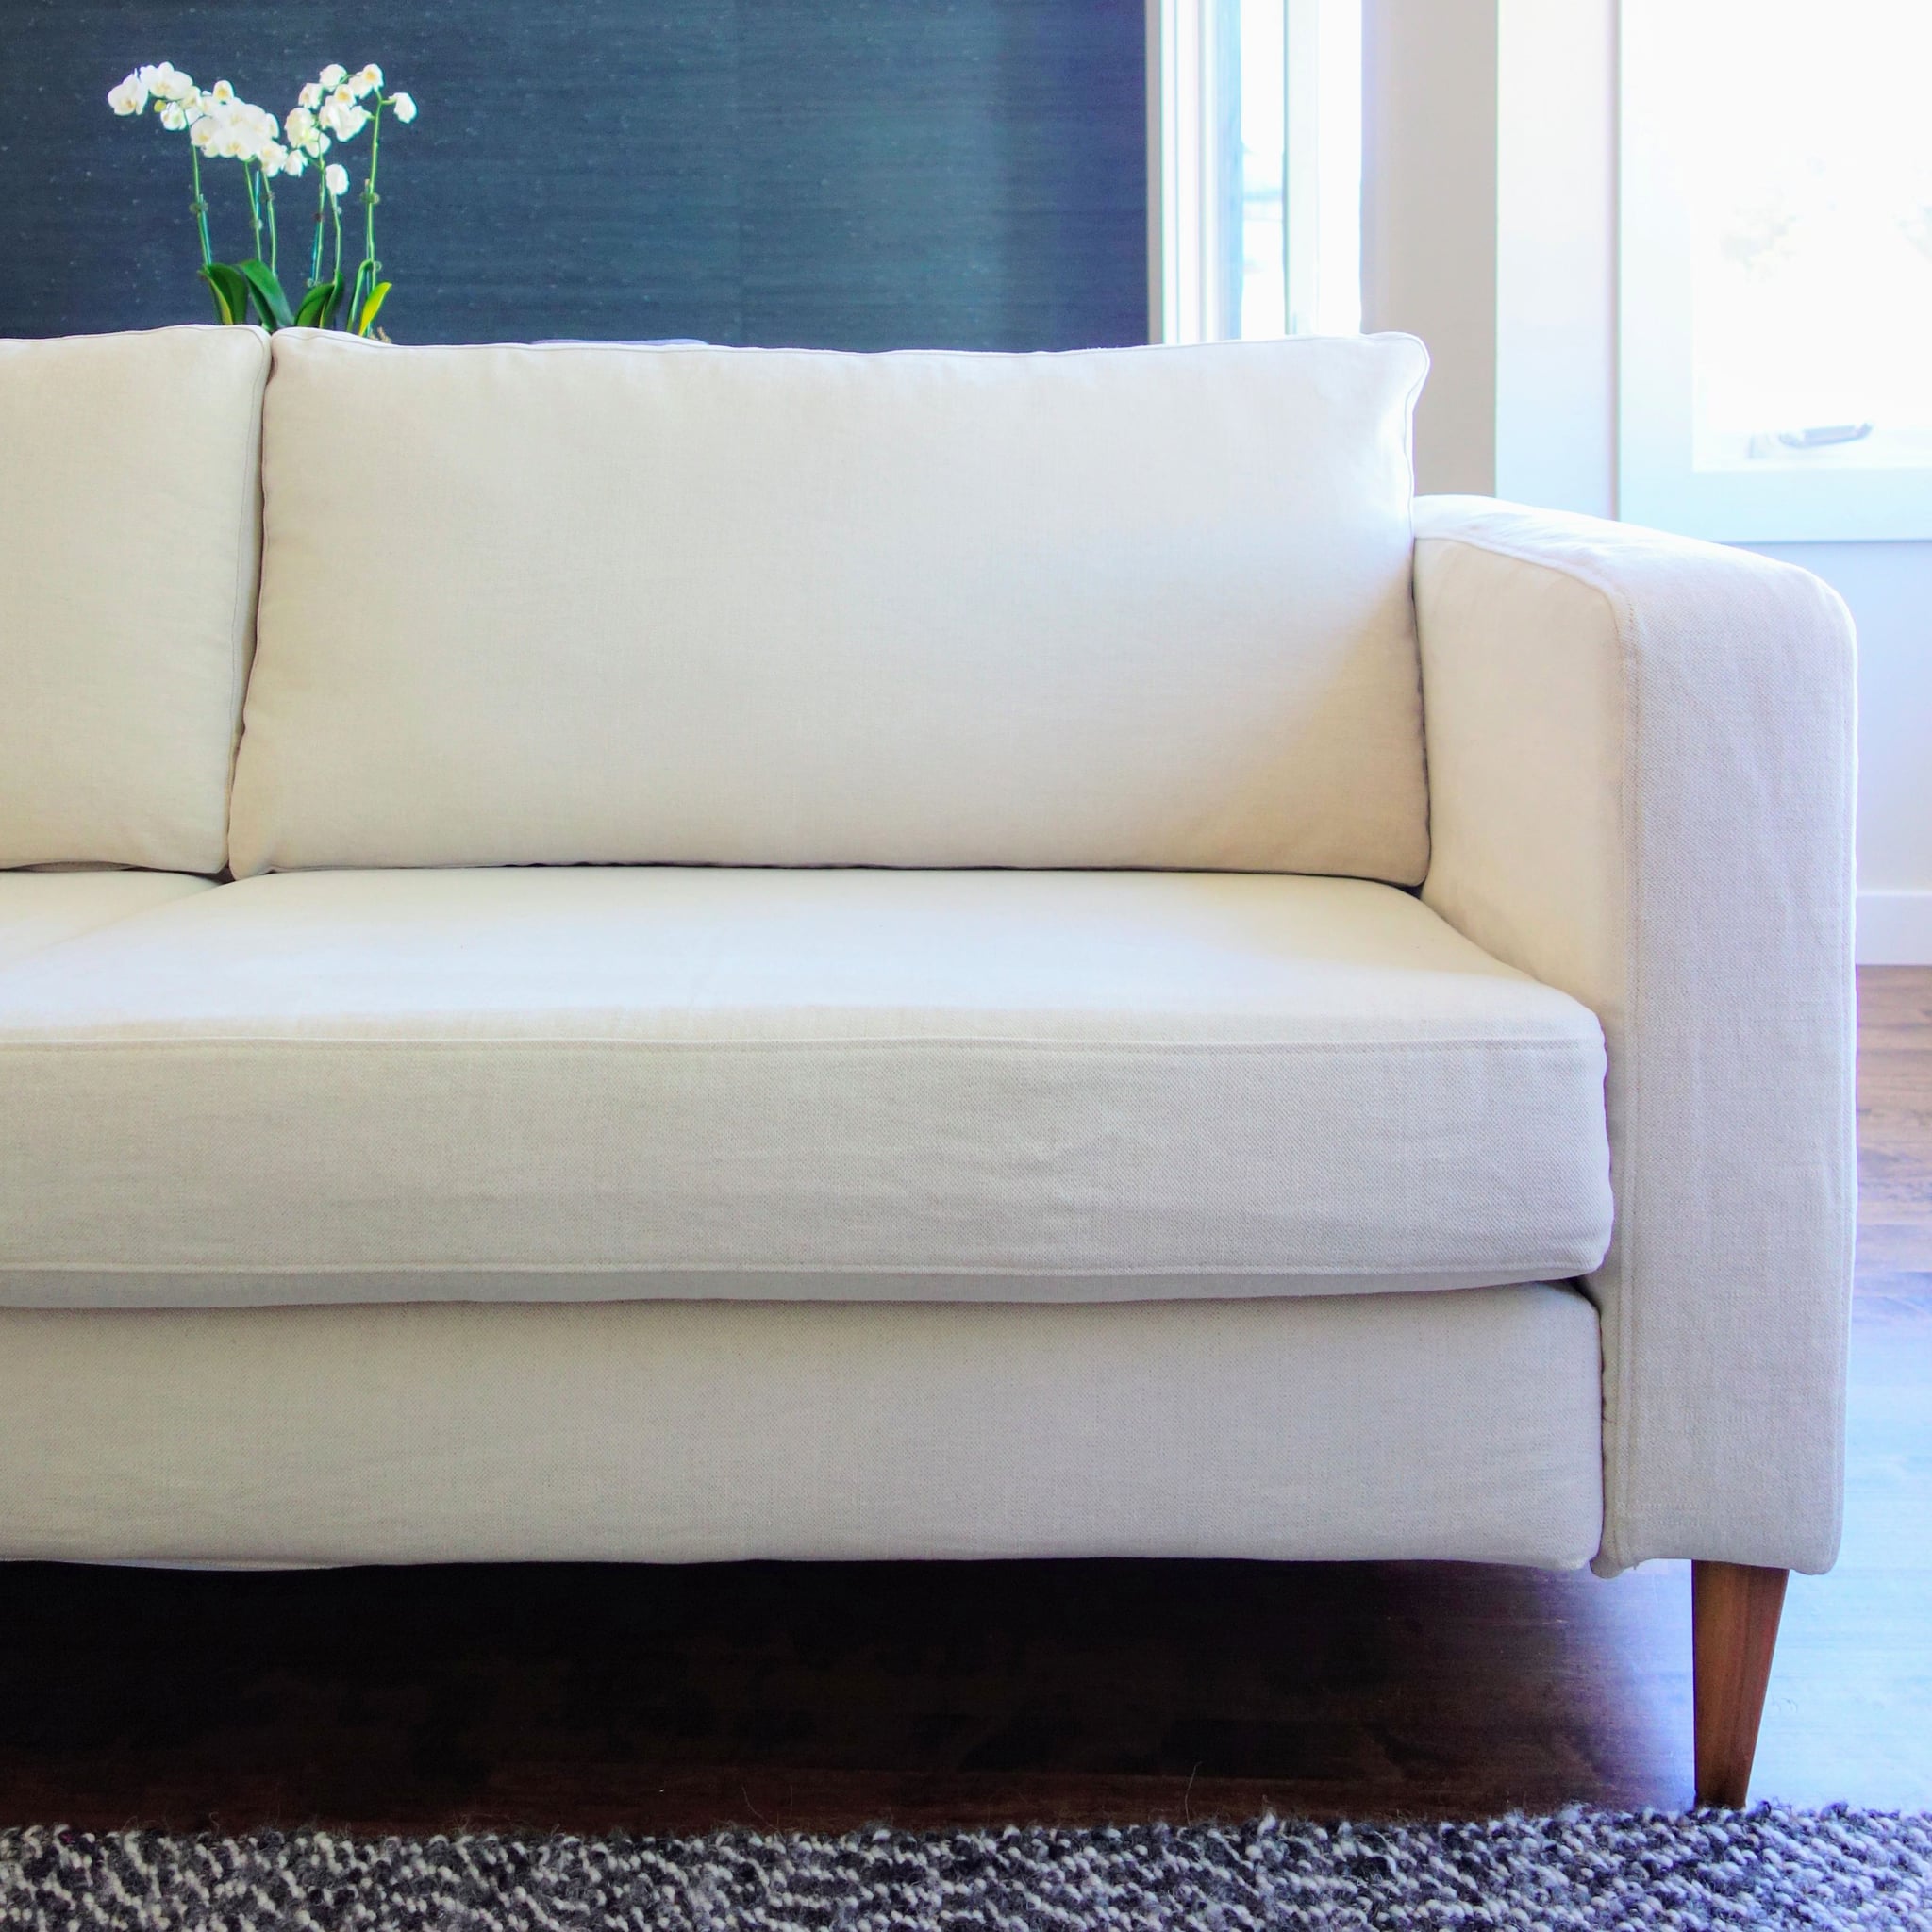 Interessant Ironisch lexicon Ikea Couch Covers Makeover | POPSUGAR Home